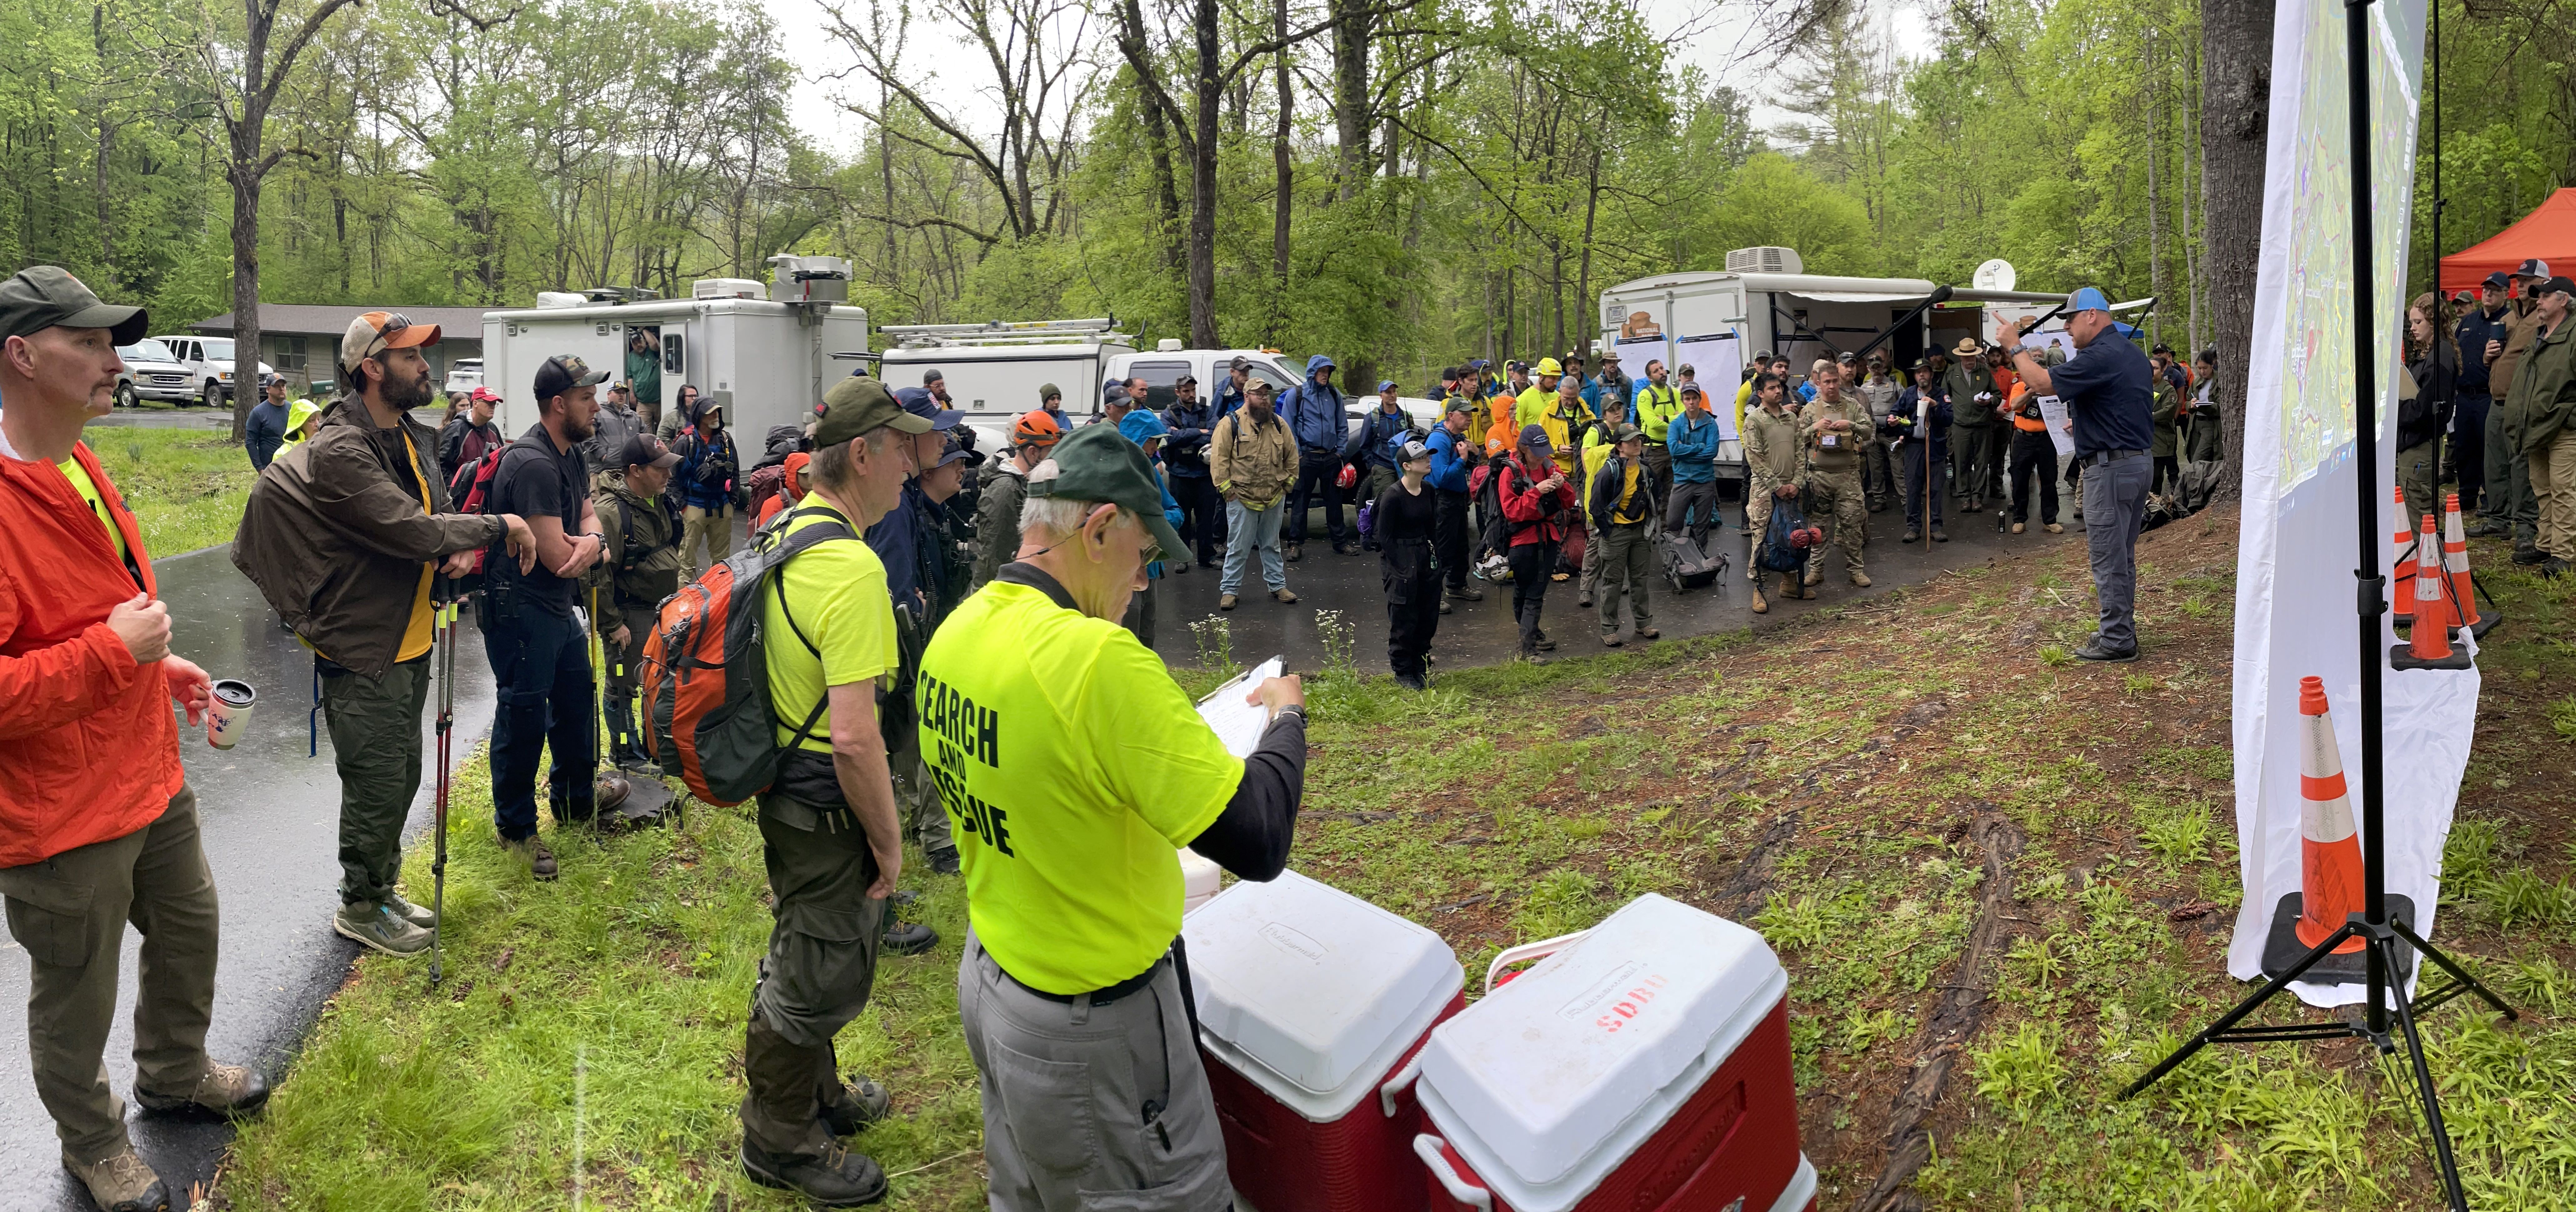 search team members gather for briefing under trees